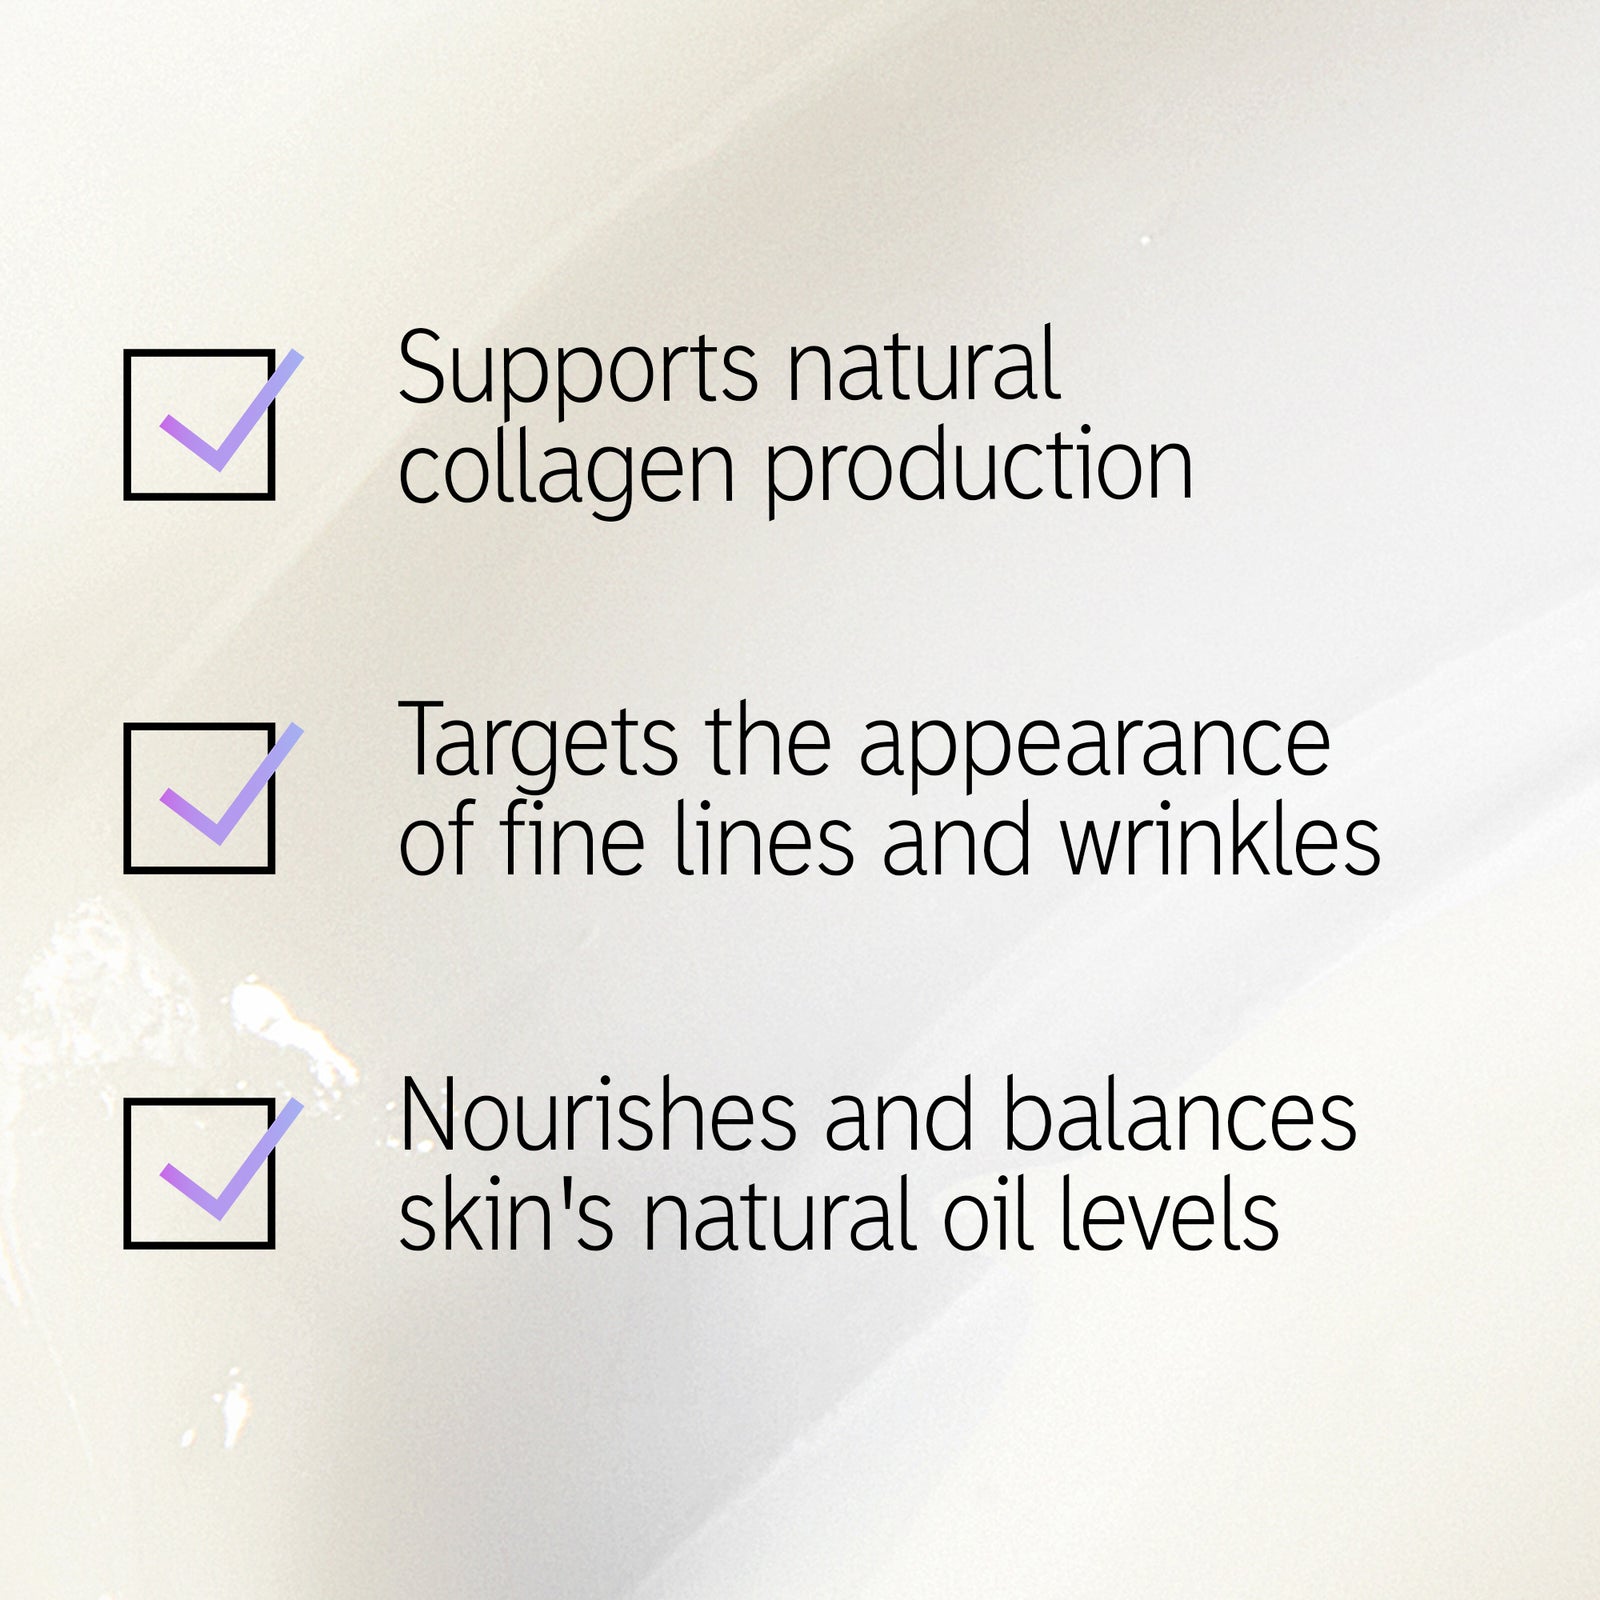 Skin Renewal Trio texture shot with text overlay listing the 3 main benefits